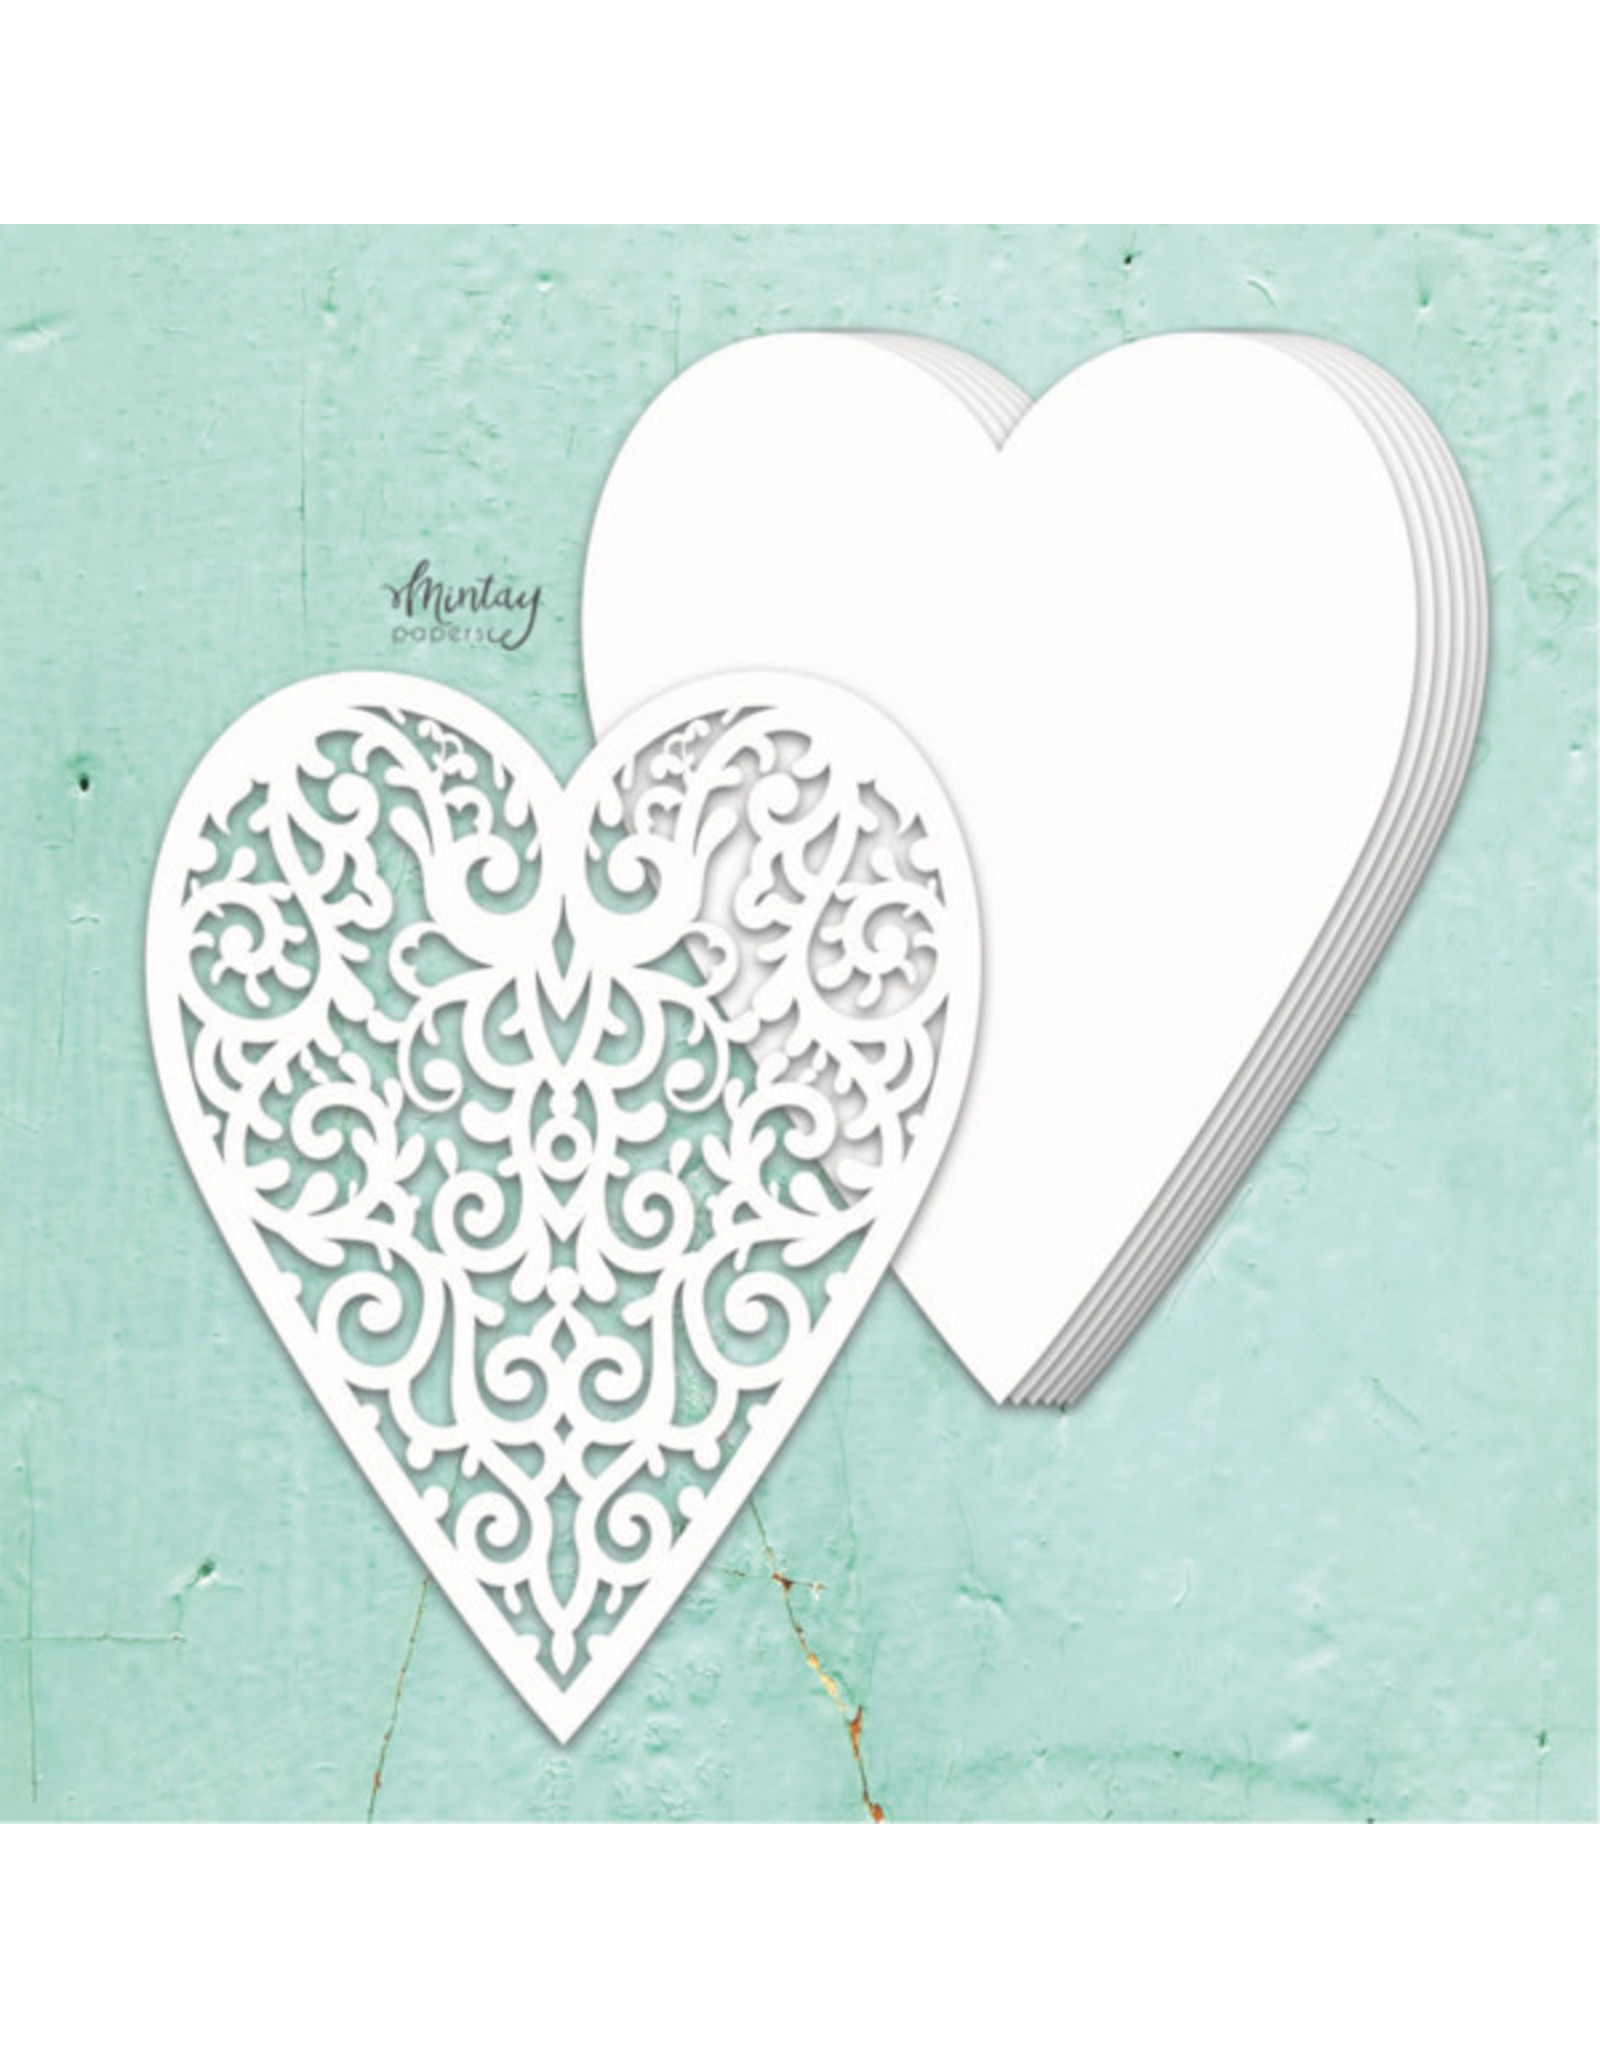 MINTAY MINTAY CHIPPIES -  HEART CHIPBOARD ALBUM BASE